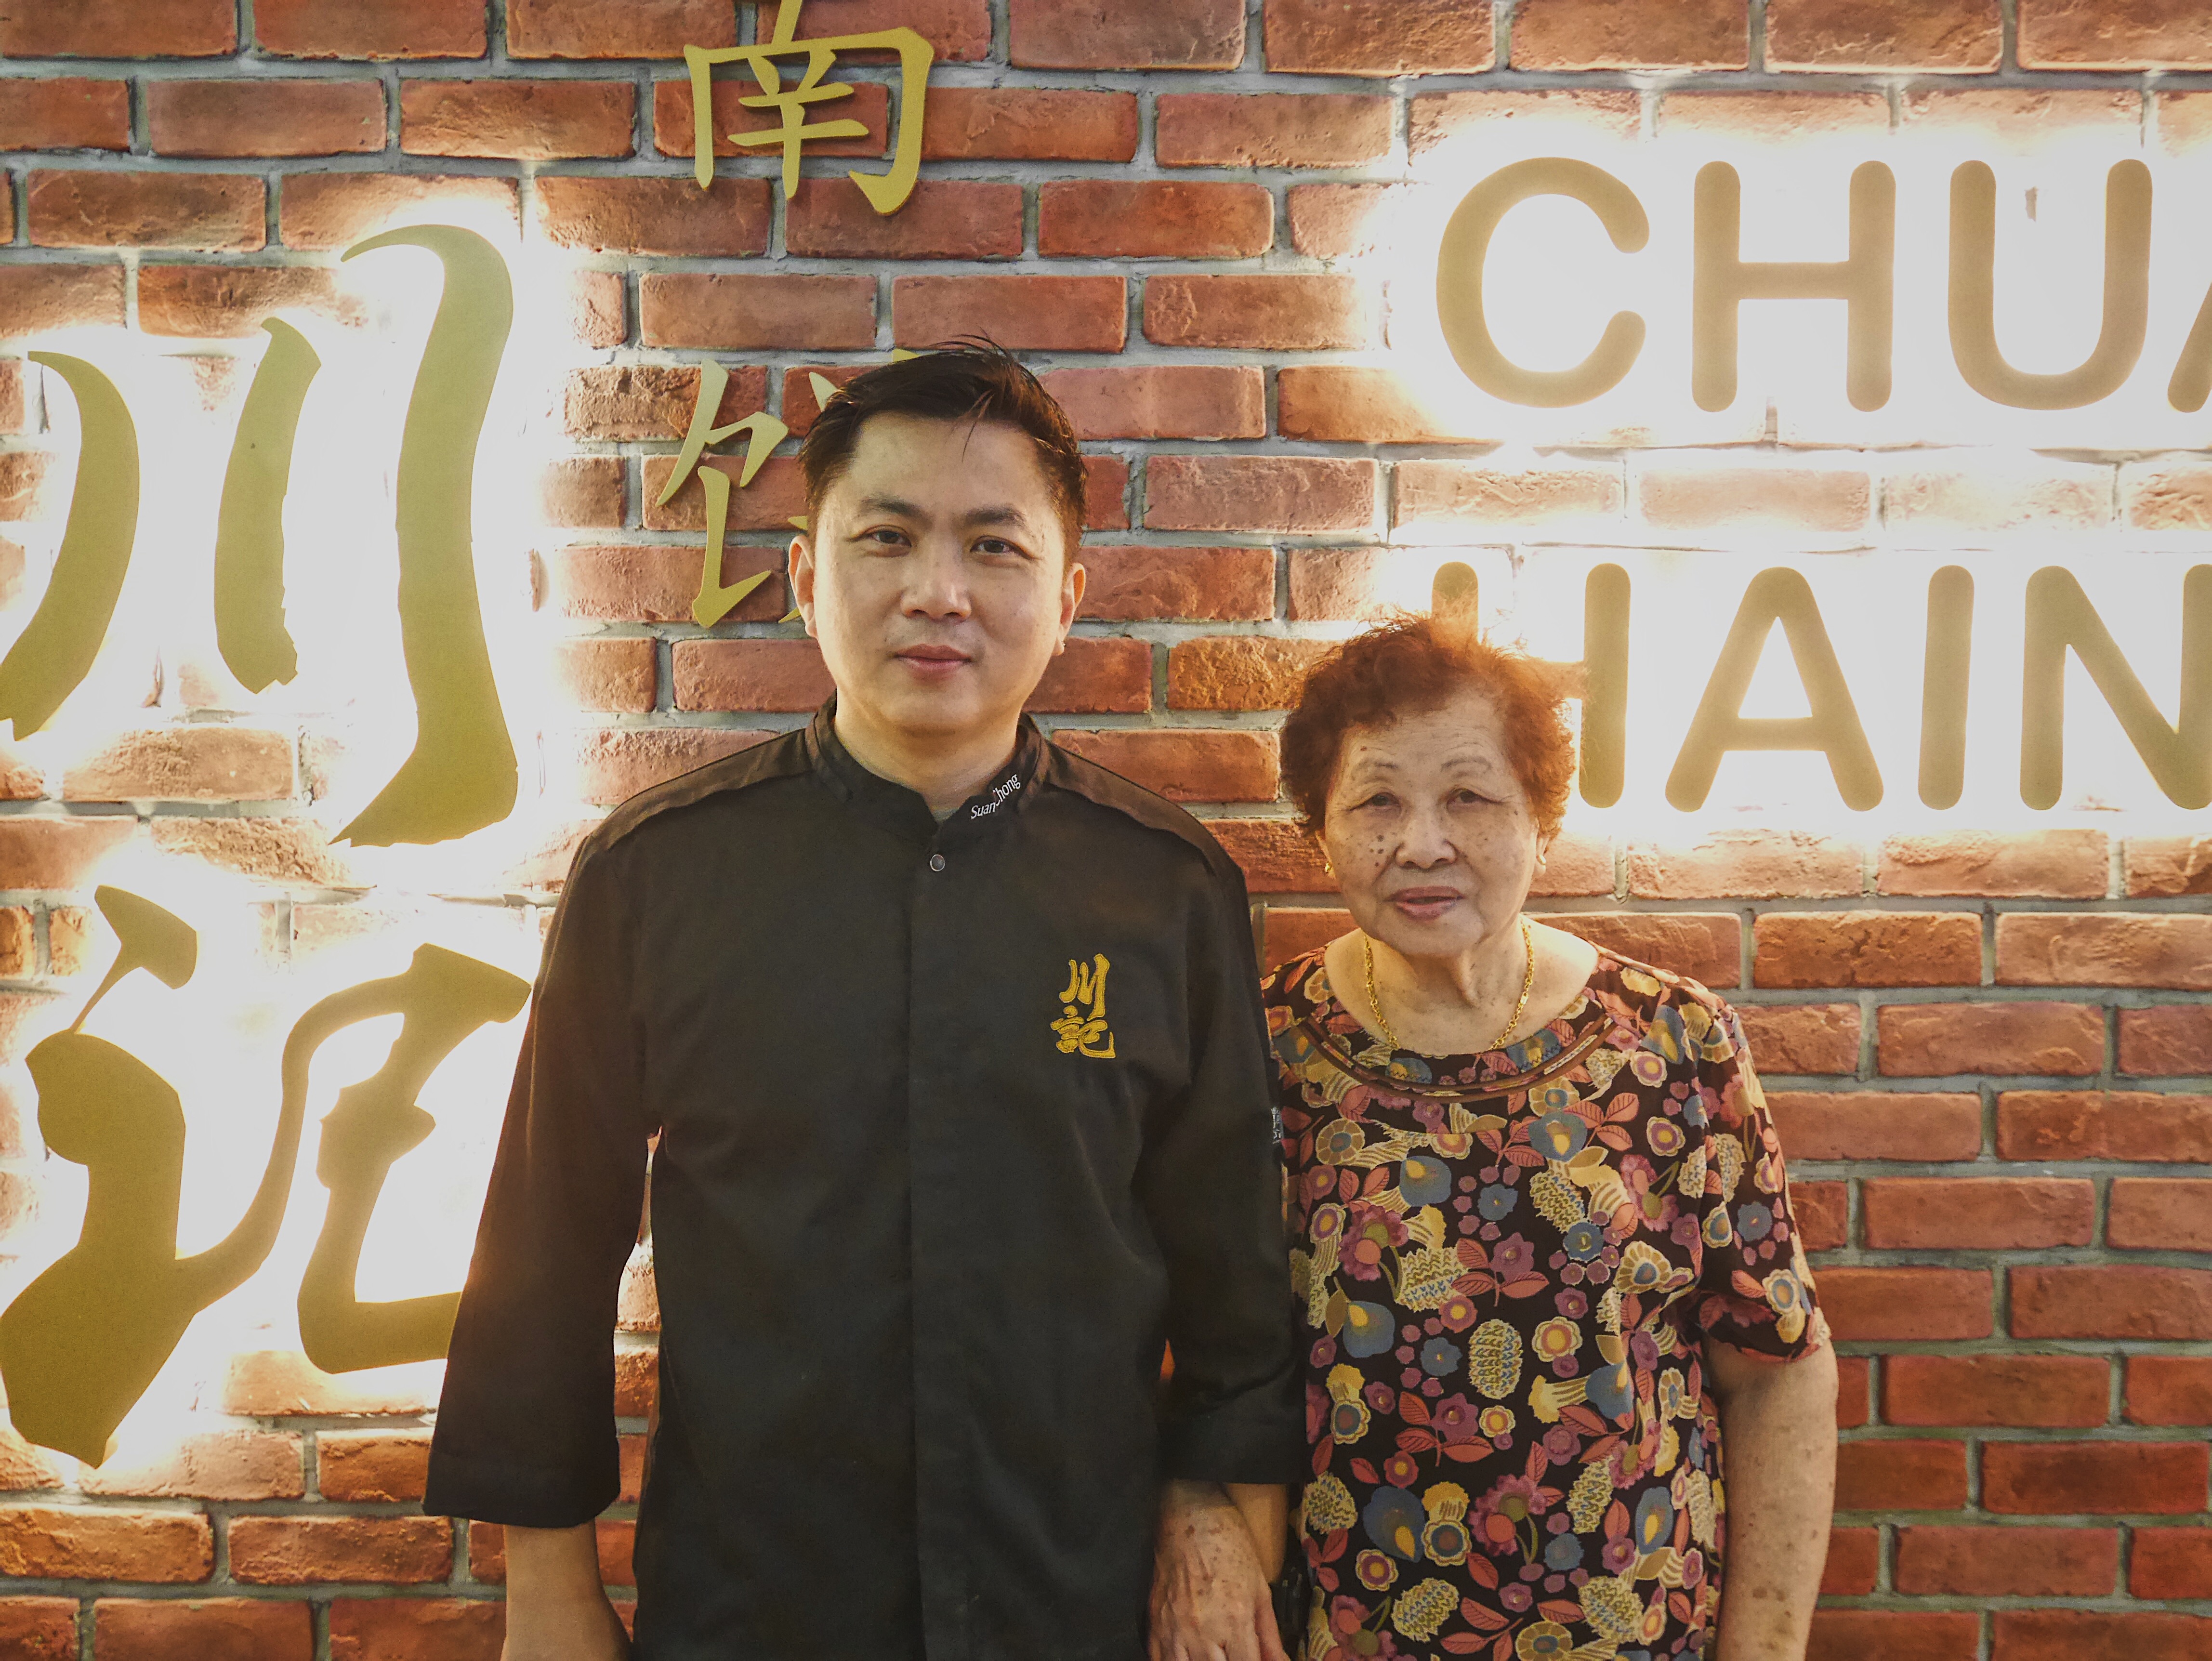 Chuan-Ji-Bakery-The-94-year-battle-to-keep-the-Hainanese-tradition-alive